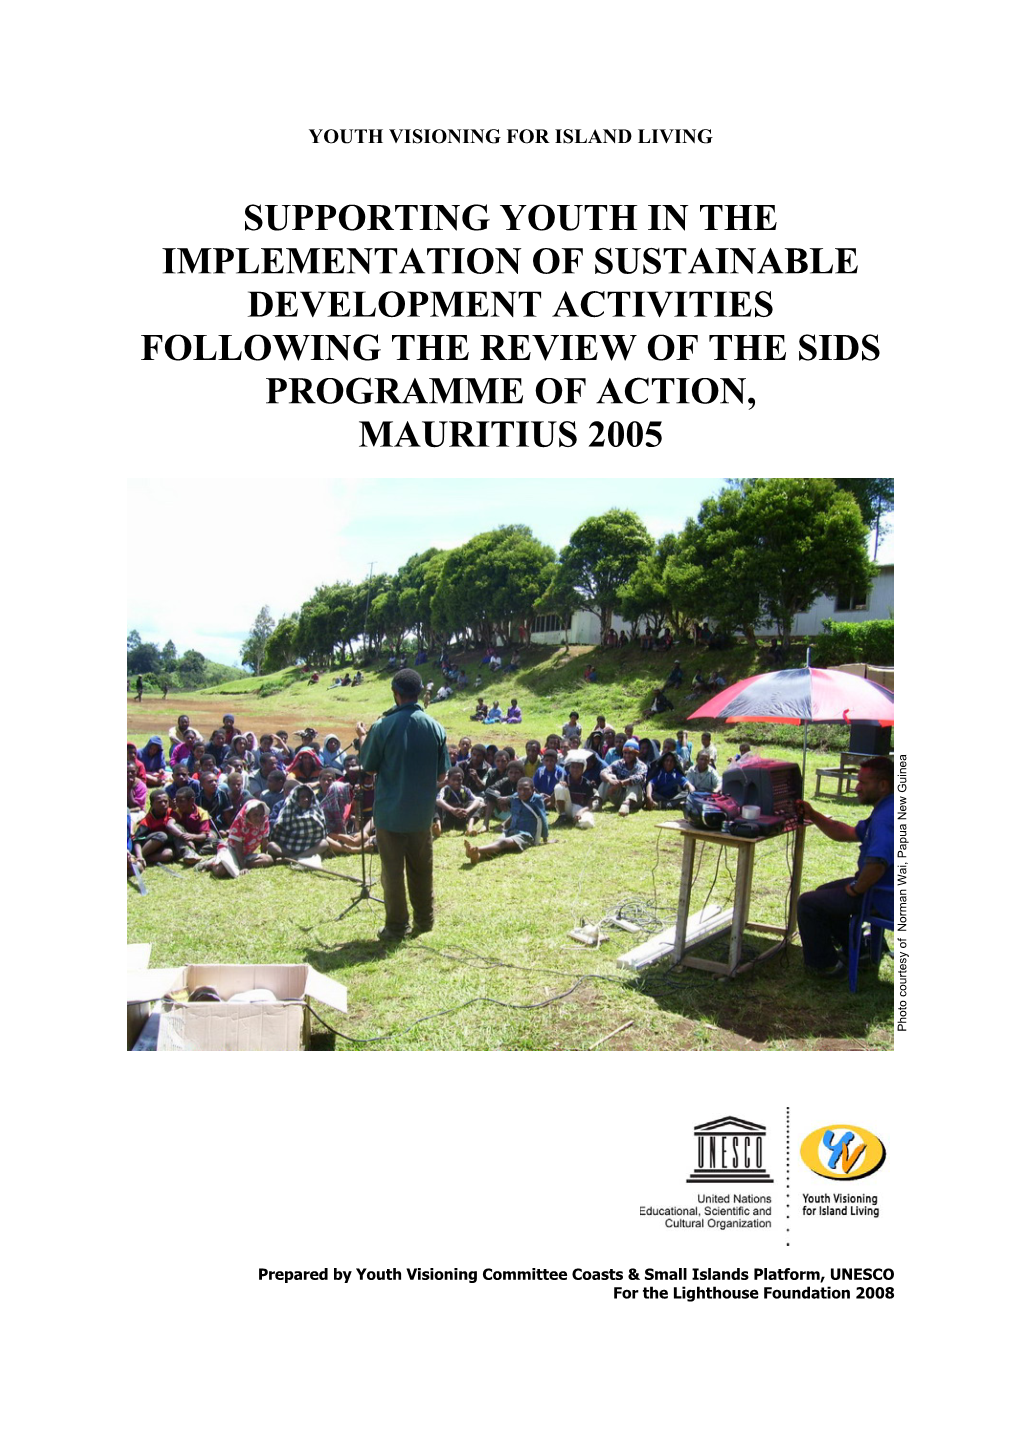 Supporting Youth in the Implementation of Sustainable Development Activities Following the Review of the Sids Programme of Action, Mauritius 2005